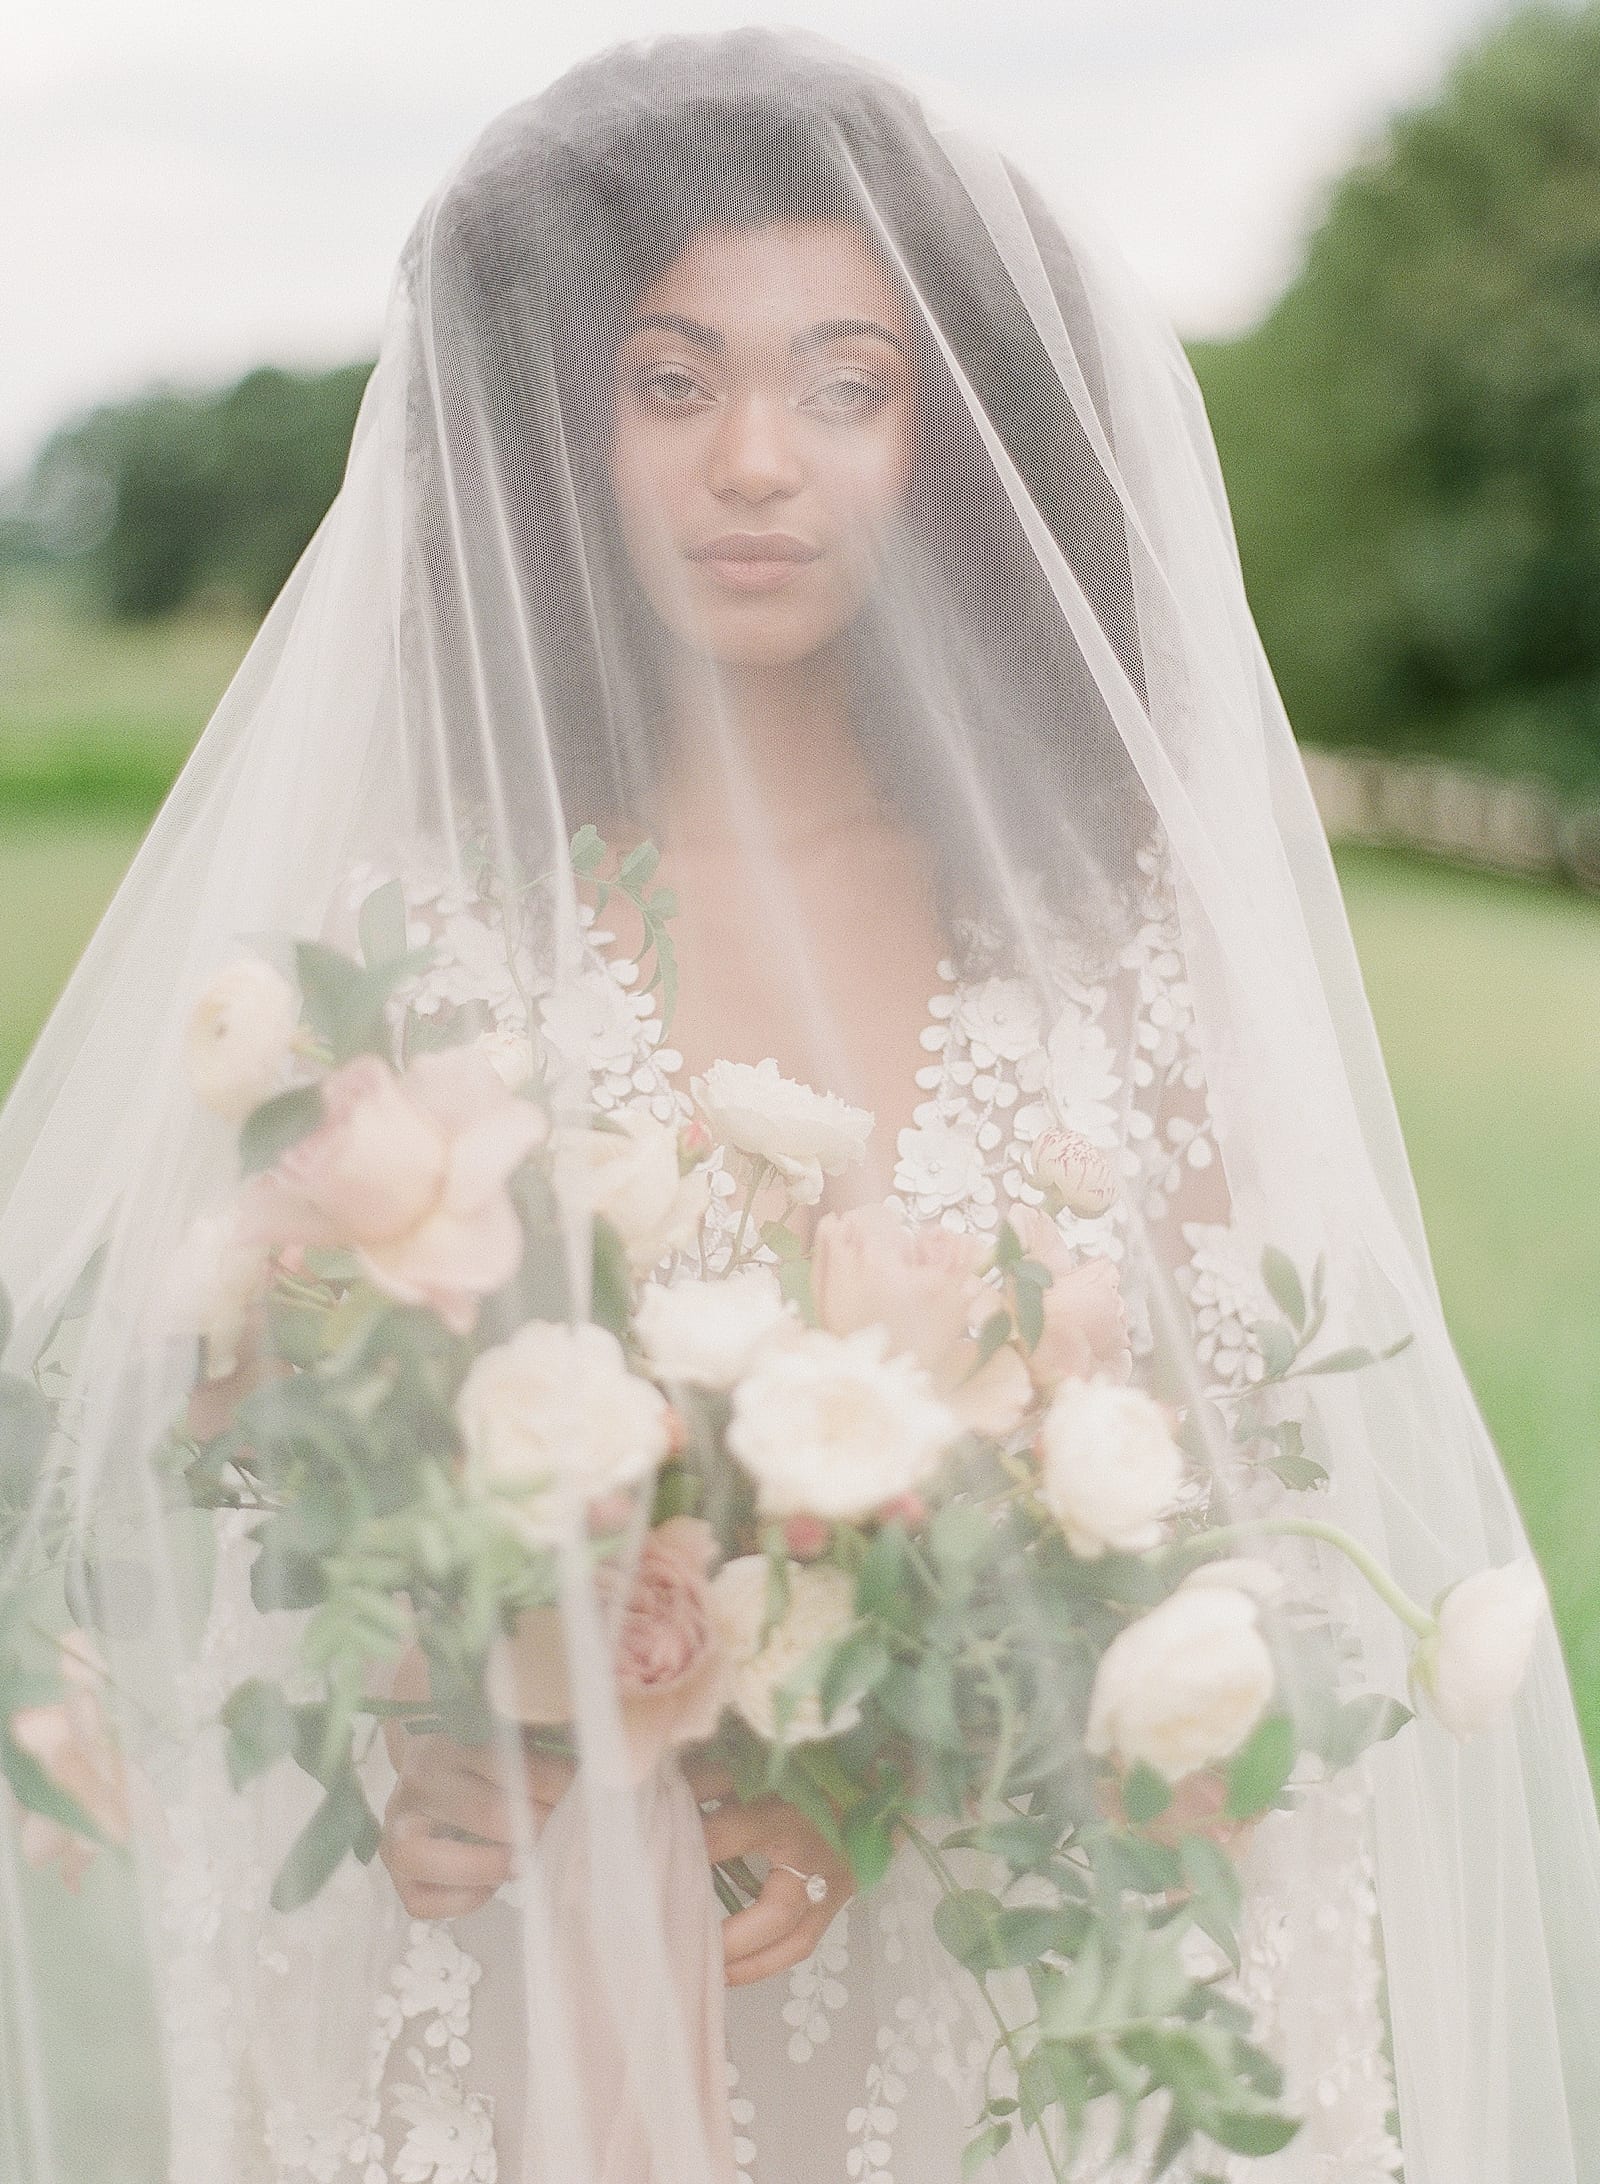 Bride Hold Bouquet with Veil Over head Photo